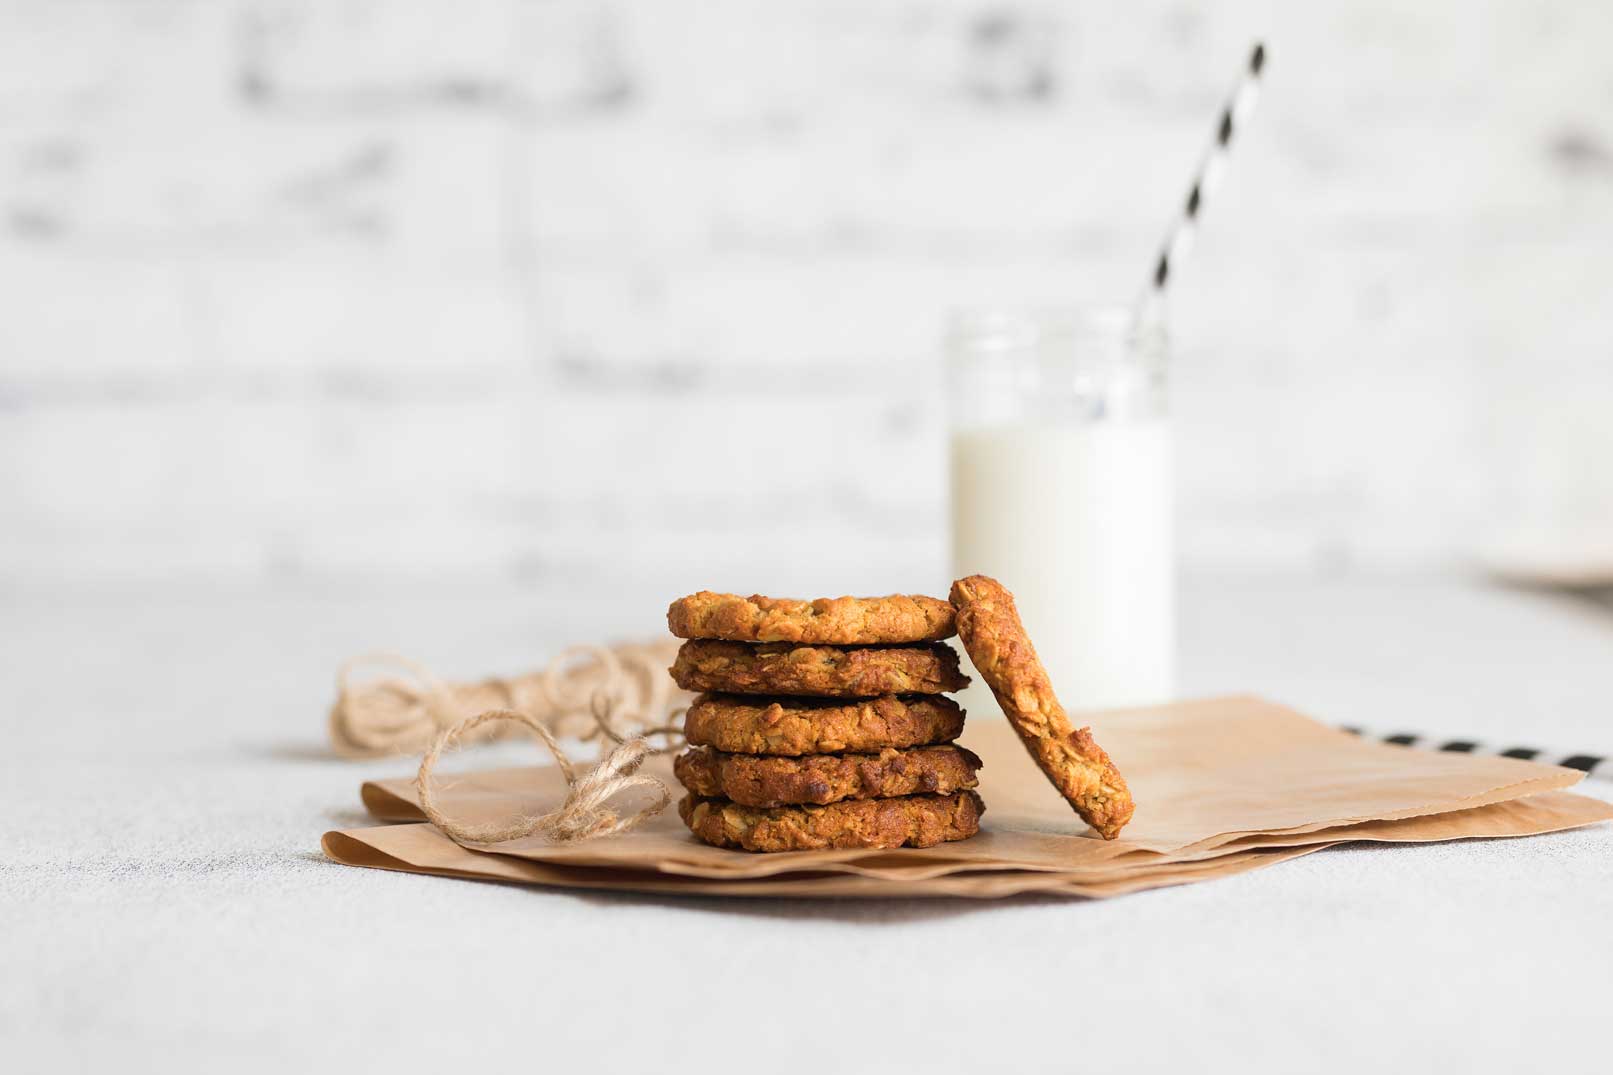 baked Anzac biscuits stacked on brown paper bag for packing served with a glass of milk